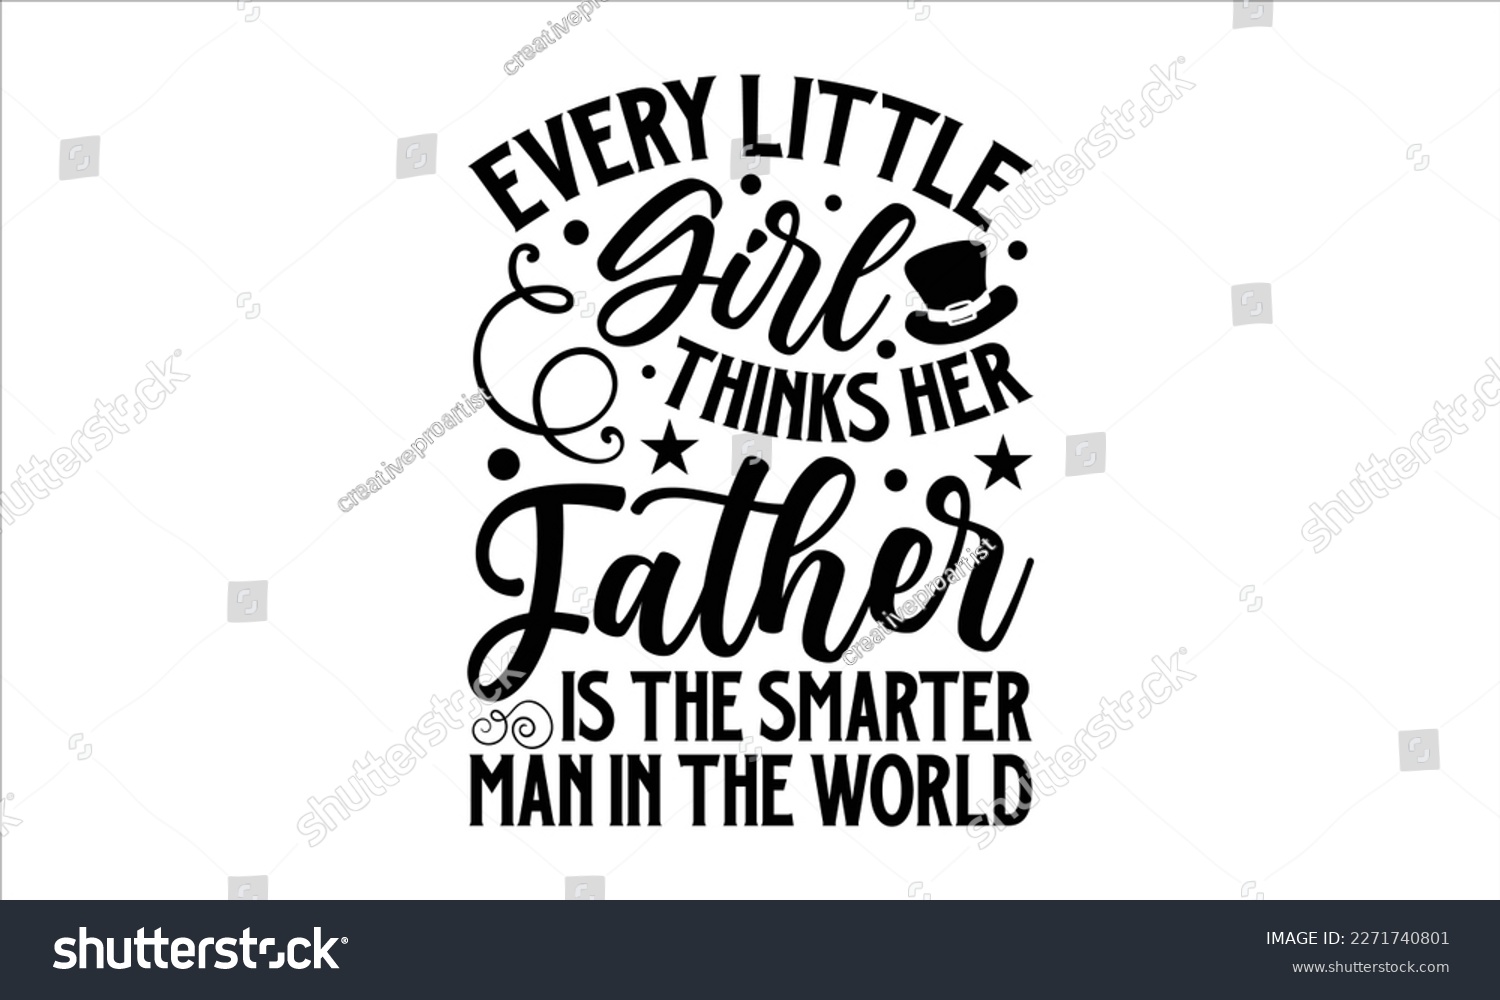 SVG of Every little girl thinks her father Is the smarter man in the world- Father's Day svg design, Hand drawn lettering phrase isolated on white background, Illustration for prints on t-shirts and bags, po svg